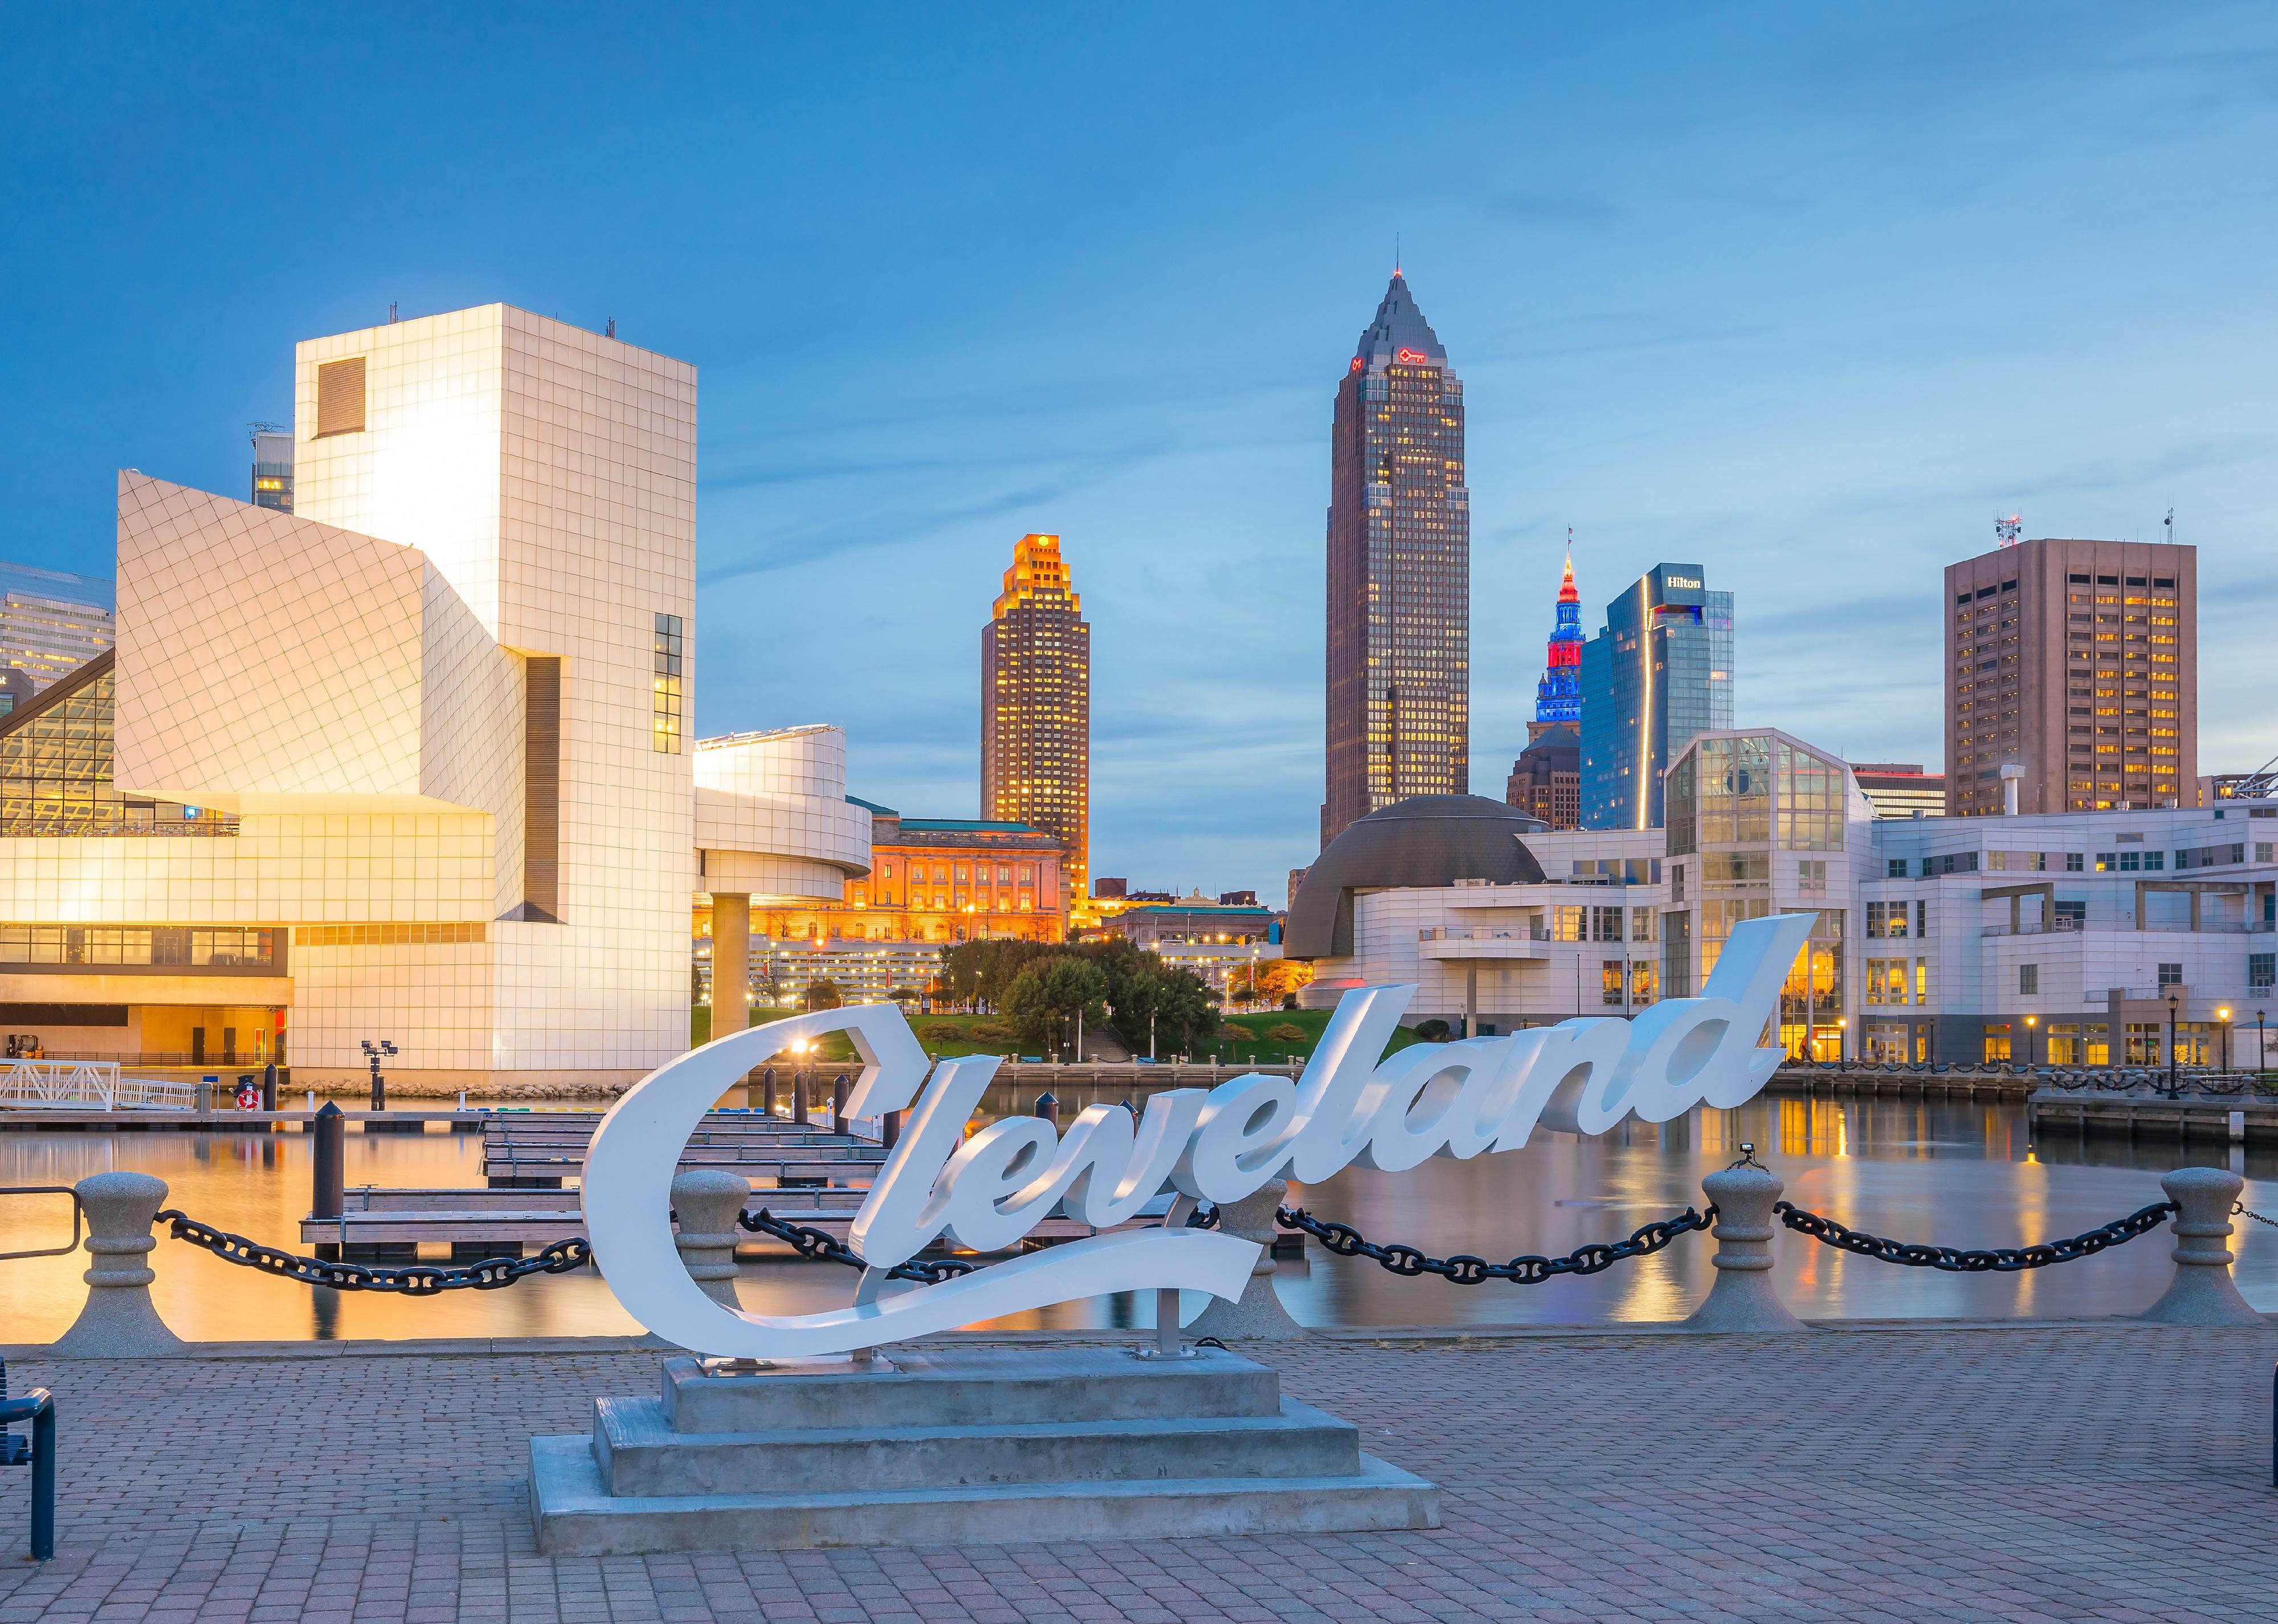 Downtown Cleveland skyline from the lakefront in Ohio.